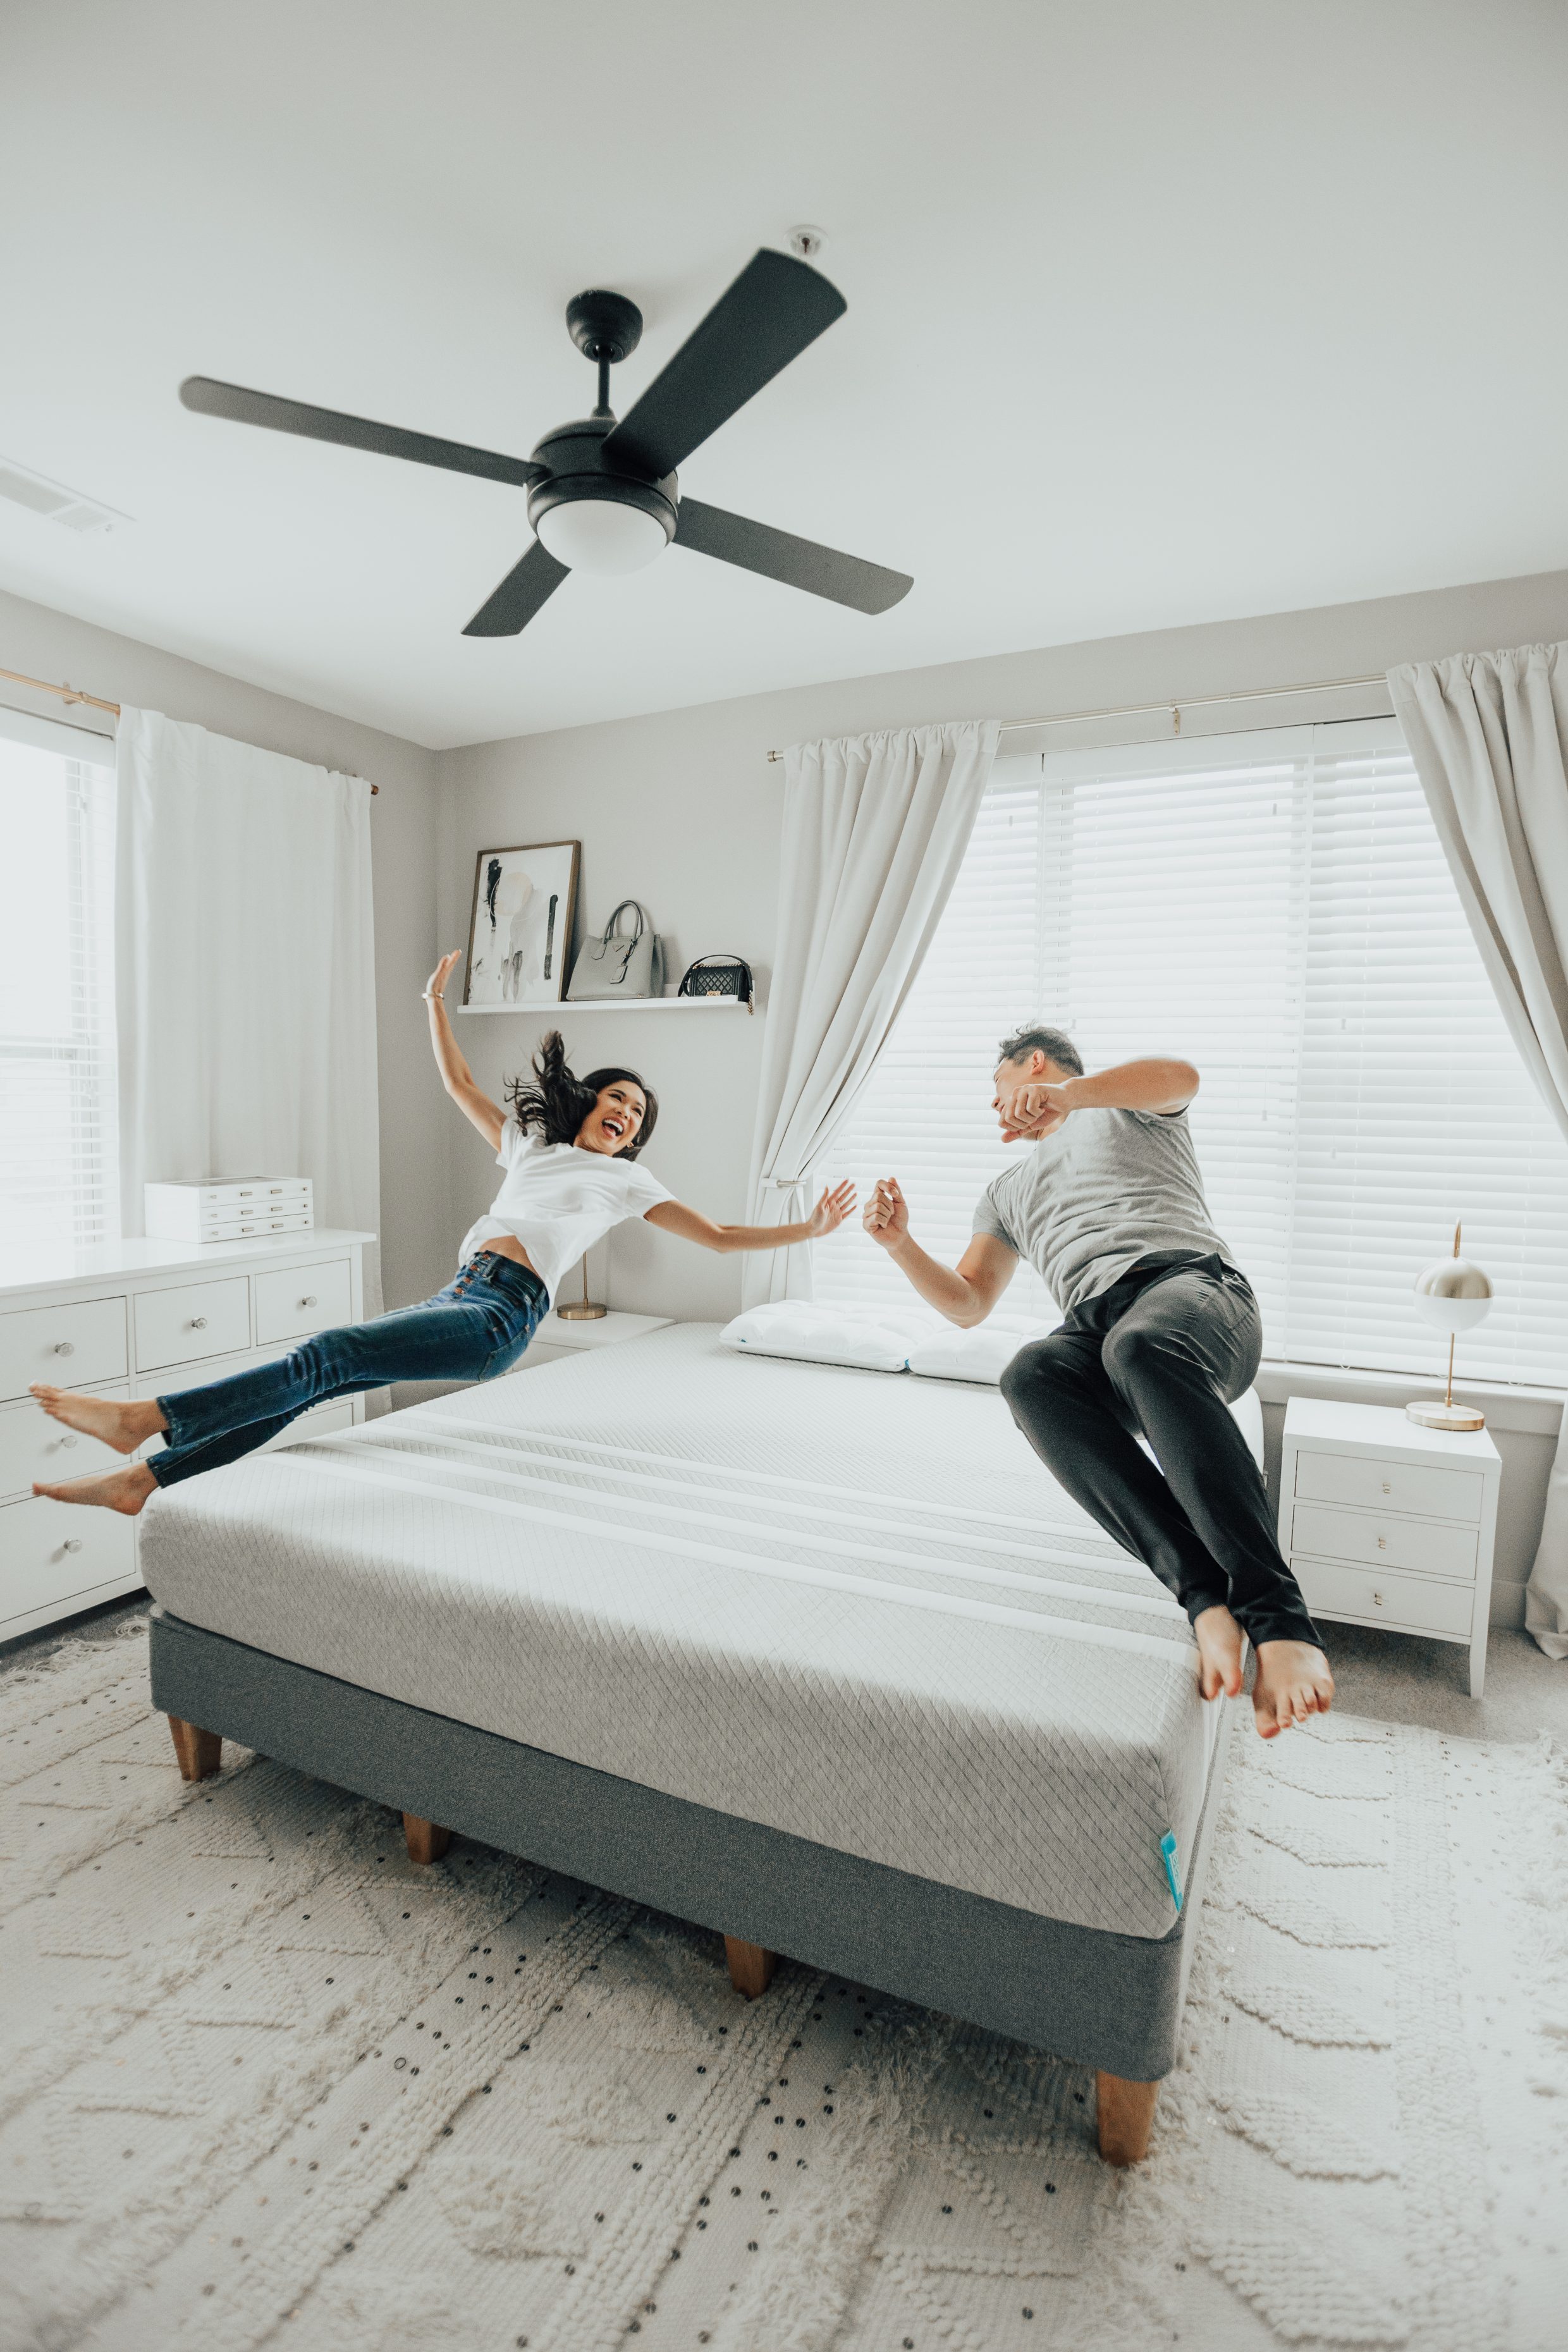 How our Leesa mattress changed everything - an honest review